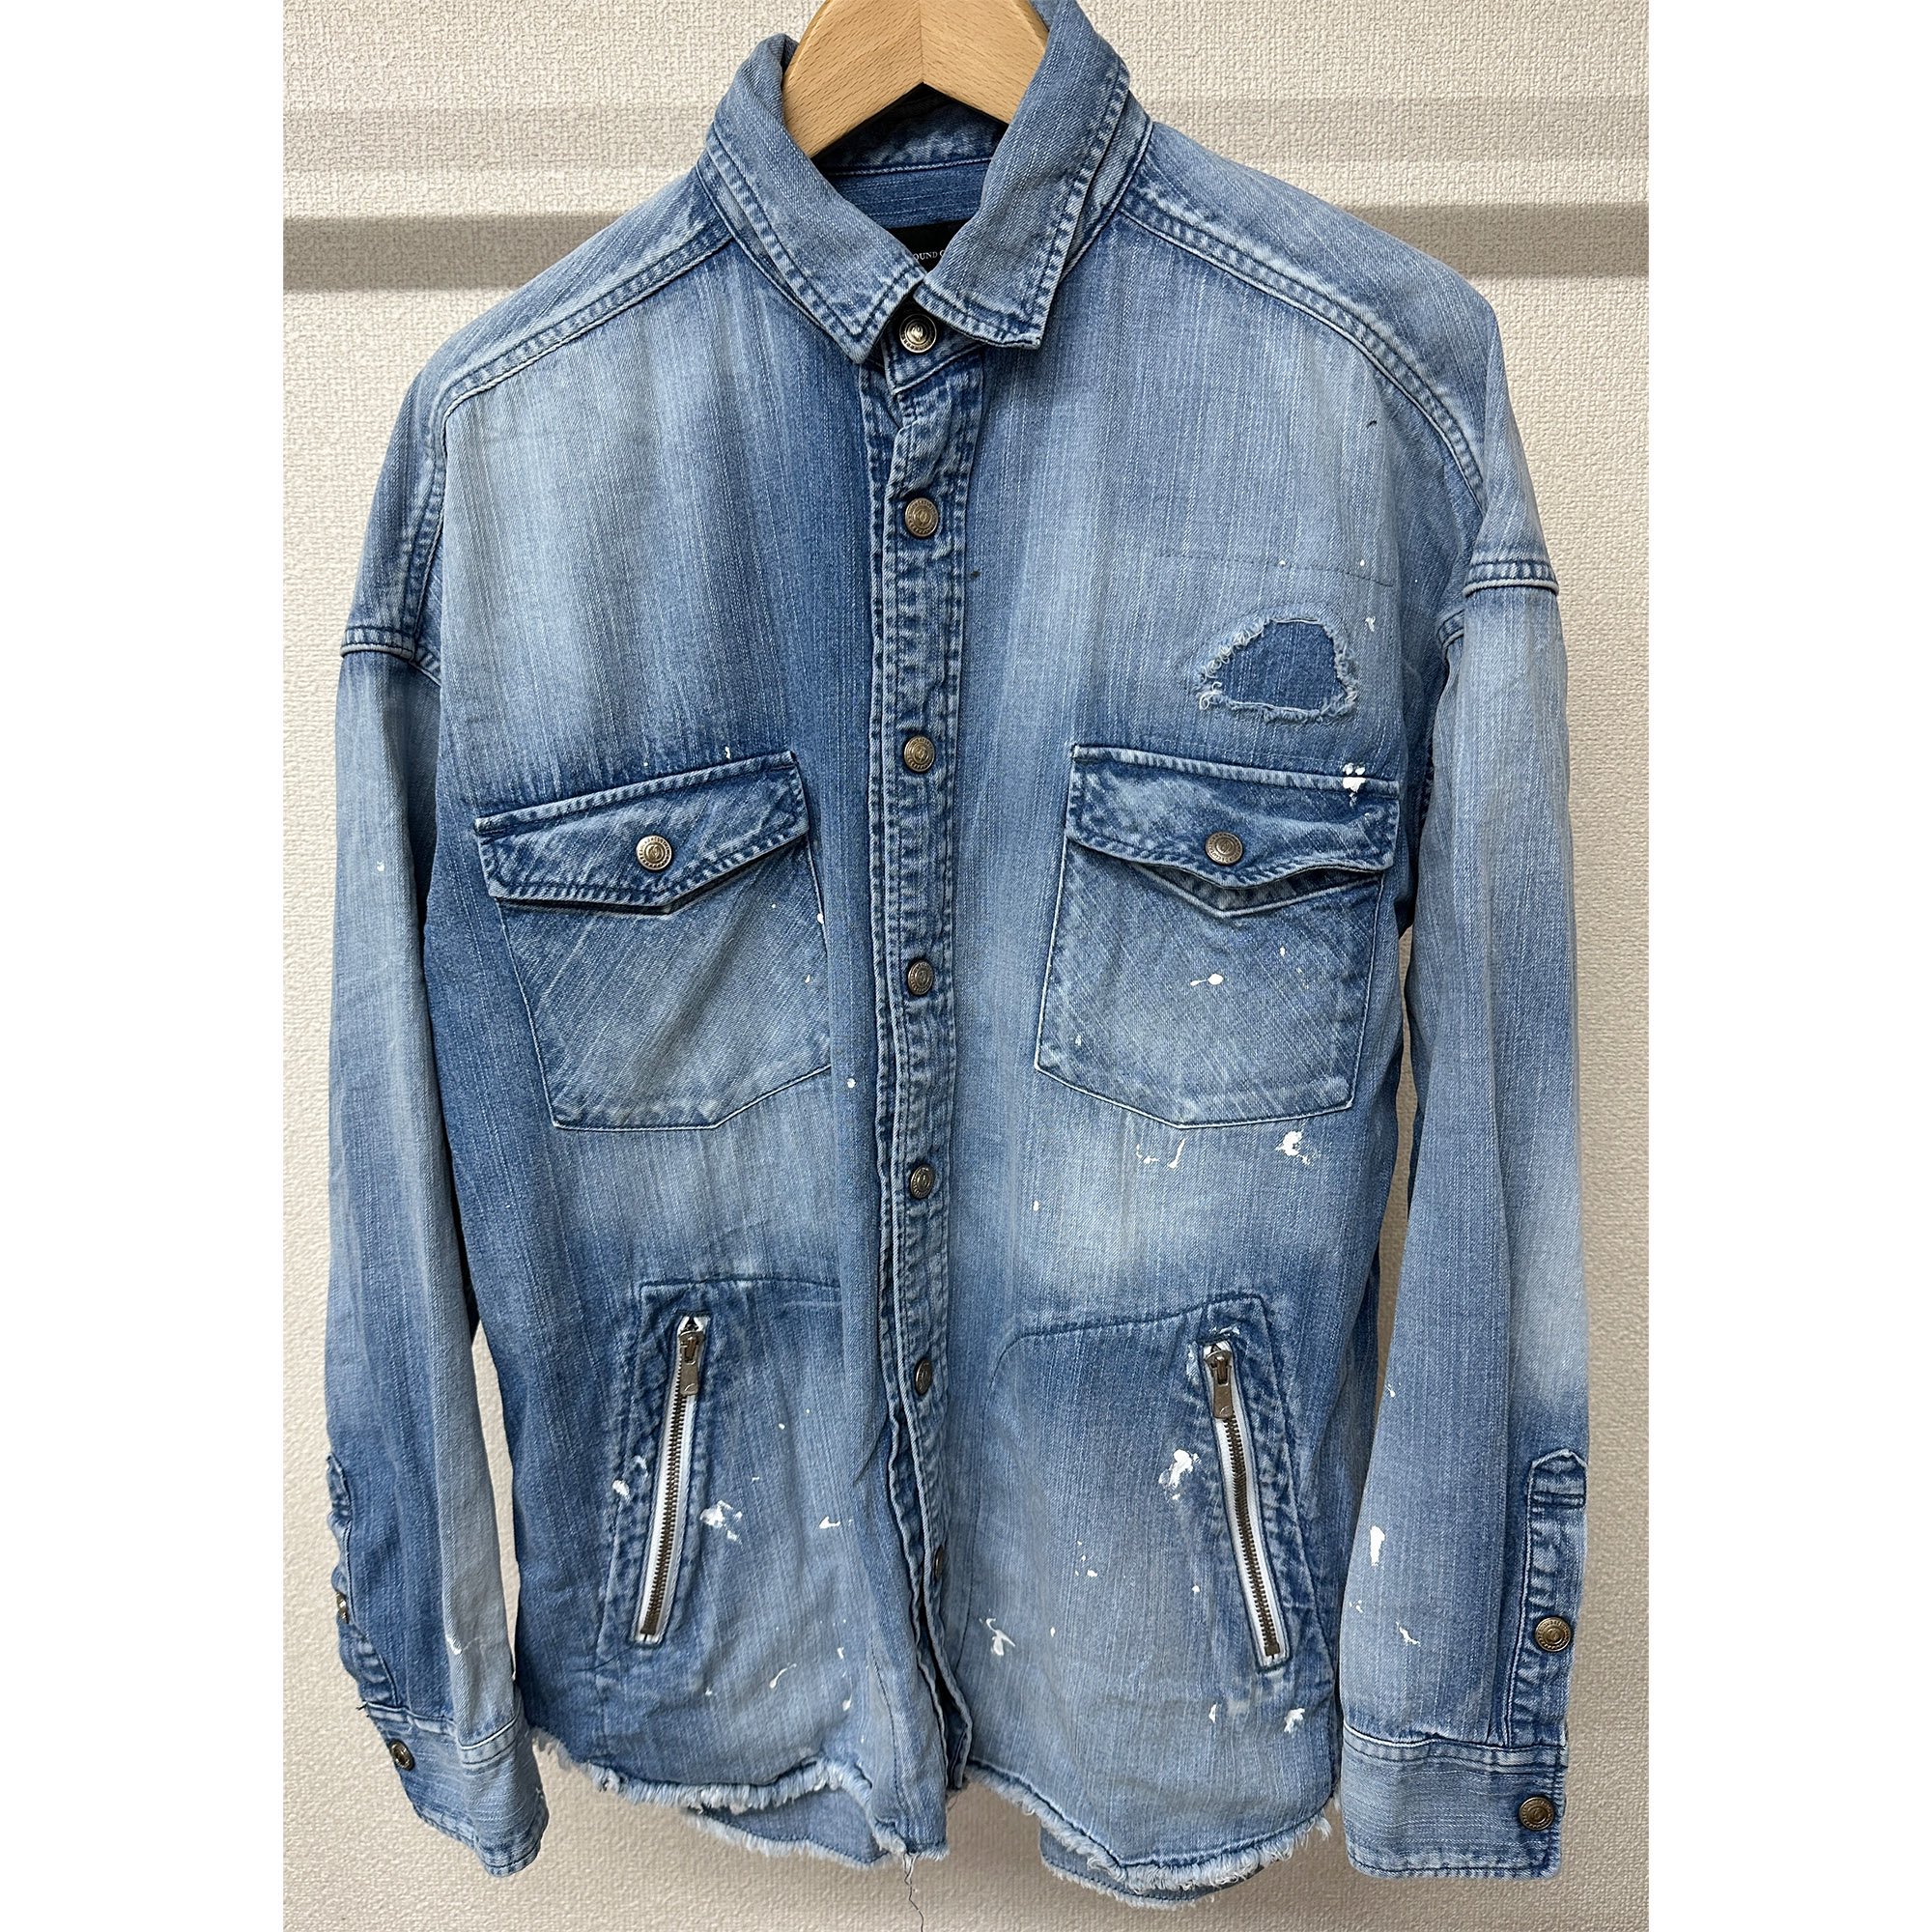 <img class='new_mark_img1' src='https://img.shop-pro.jp/img/new/icons1.gif' style='border:none;display:inline;margin:0px;padding:0px;width:auto;' />OVER DENIM shirts LIND